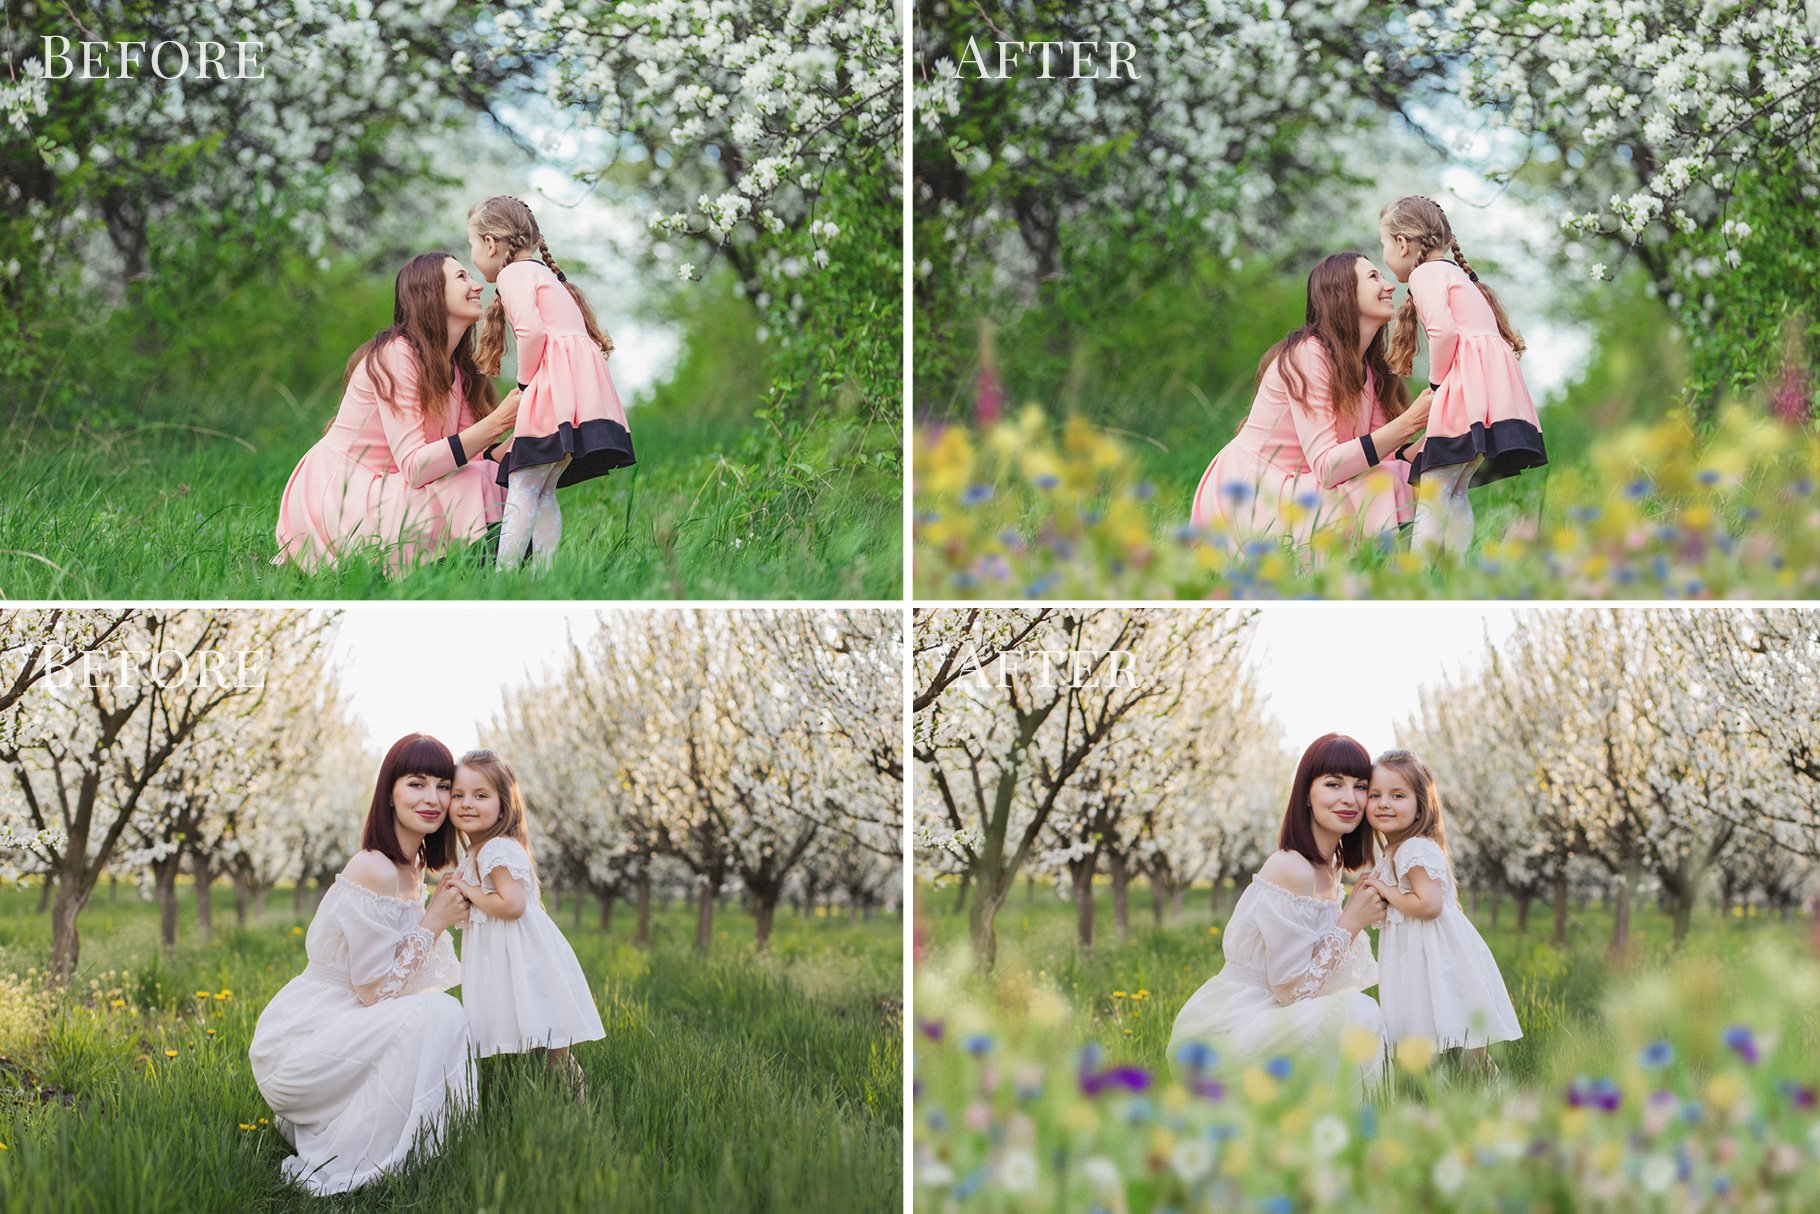 spring meadow photo overlays from brown leopard before after 2 897